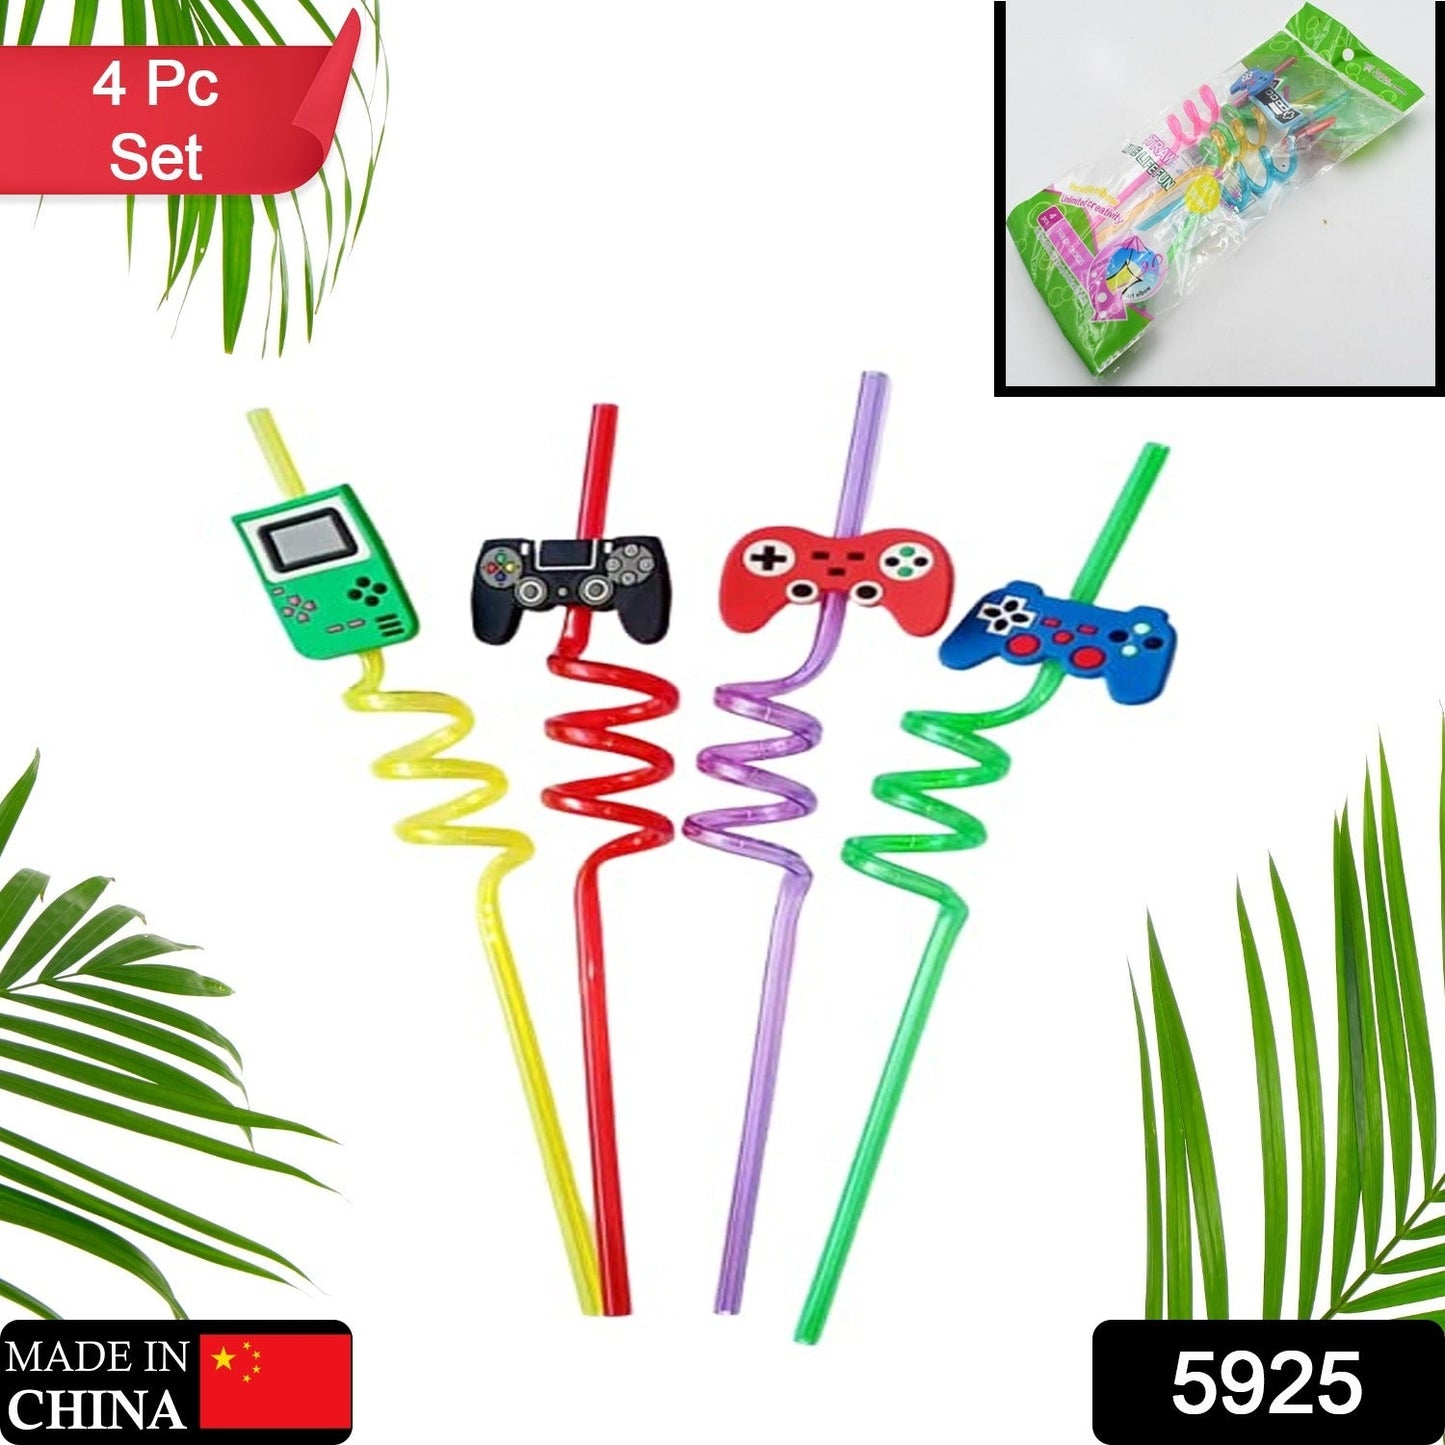 5925 Reusable straws are perfect for kids' summer parties. Plastic Straws Reusable Drinking Straws with Cartoon Decoration for Kids Birthday Party Favors or other summer celebration (4 pc Set)